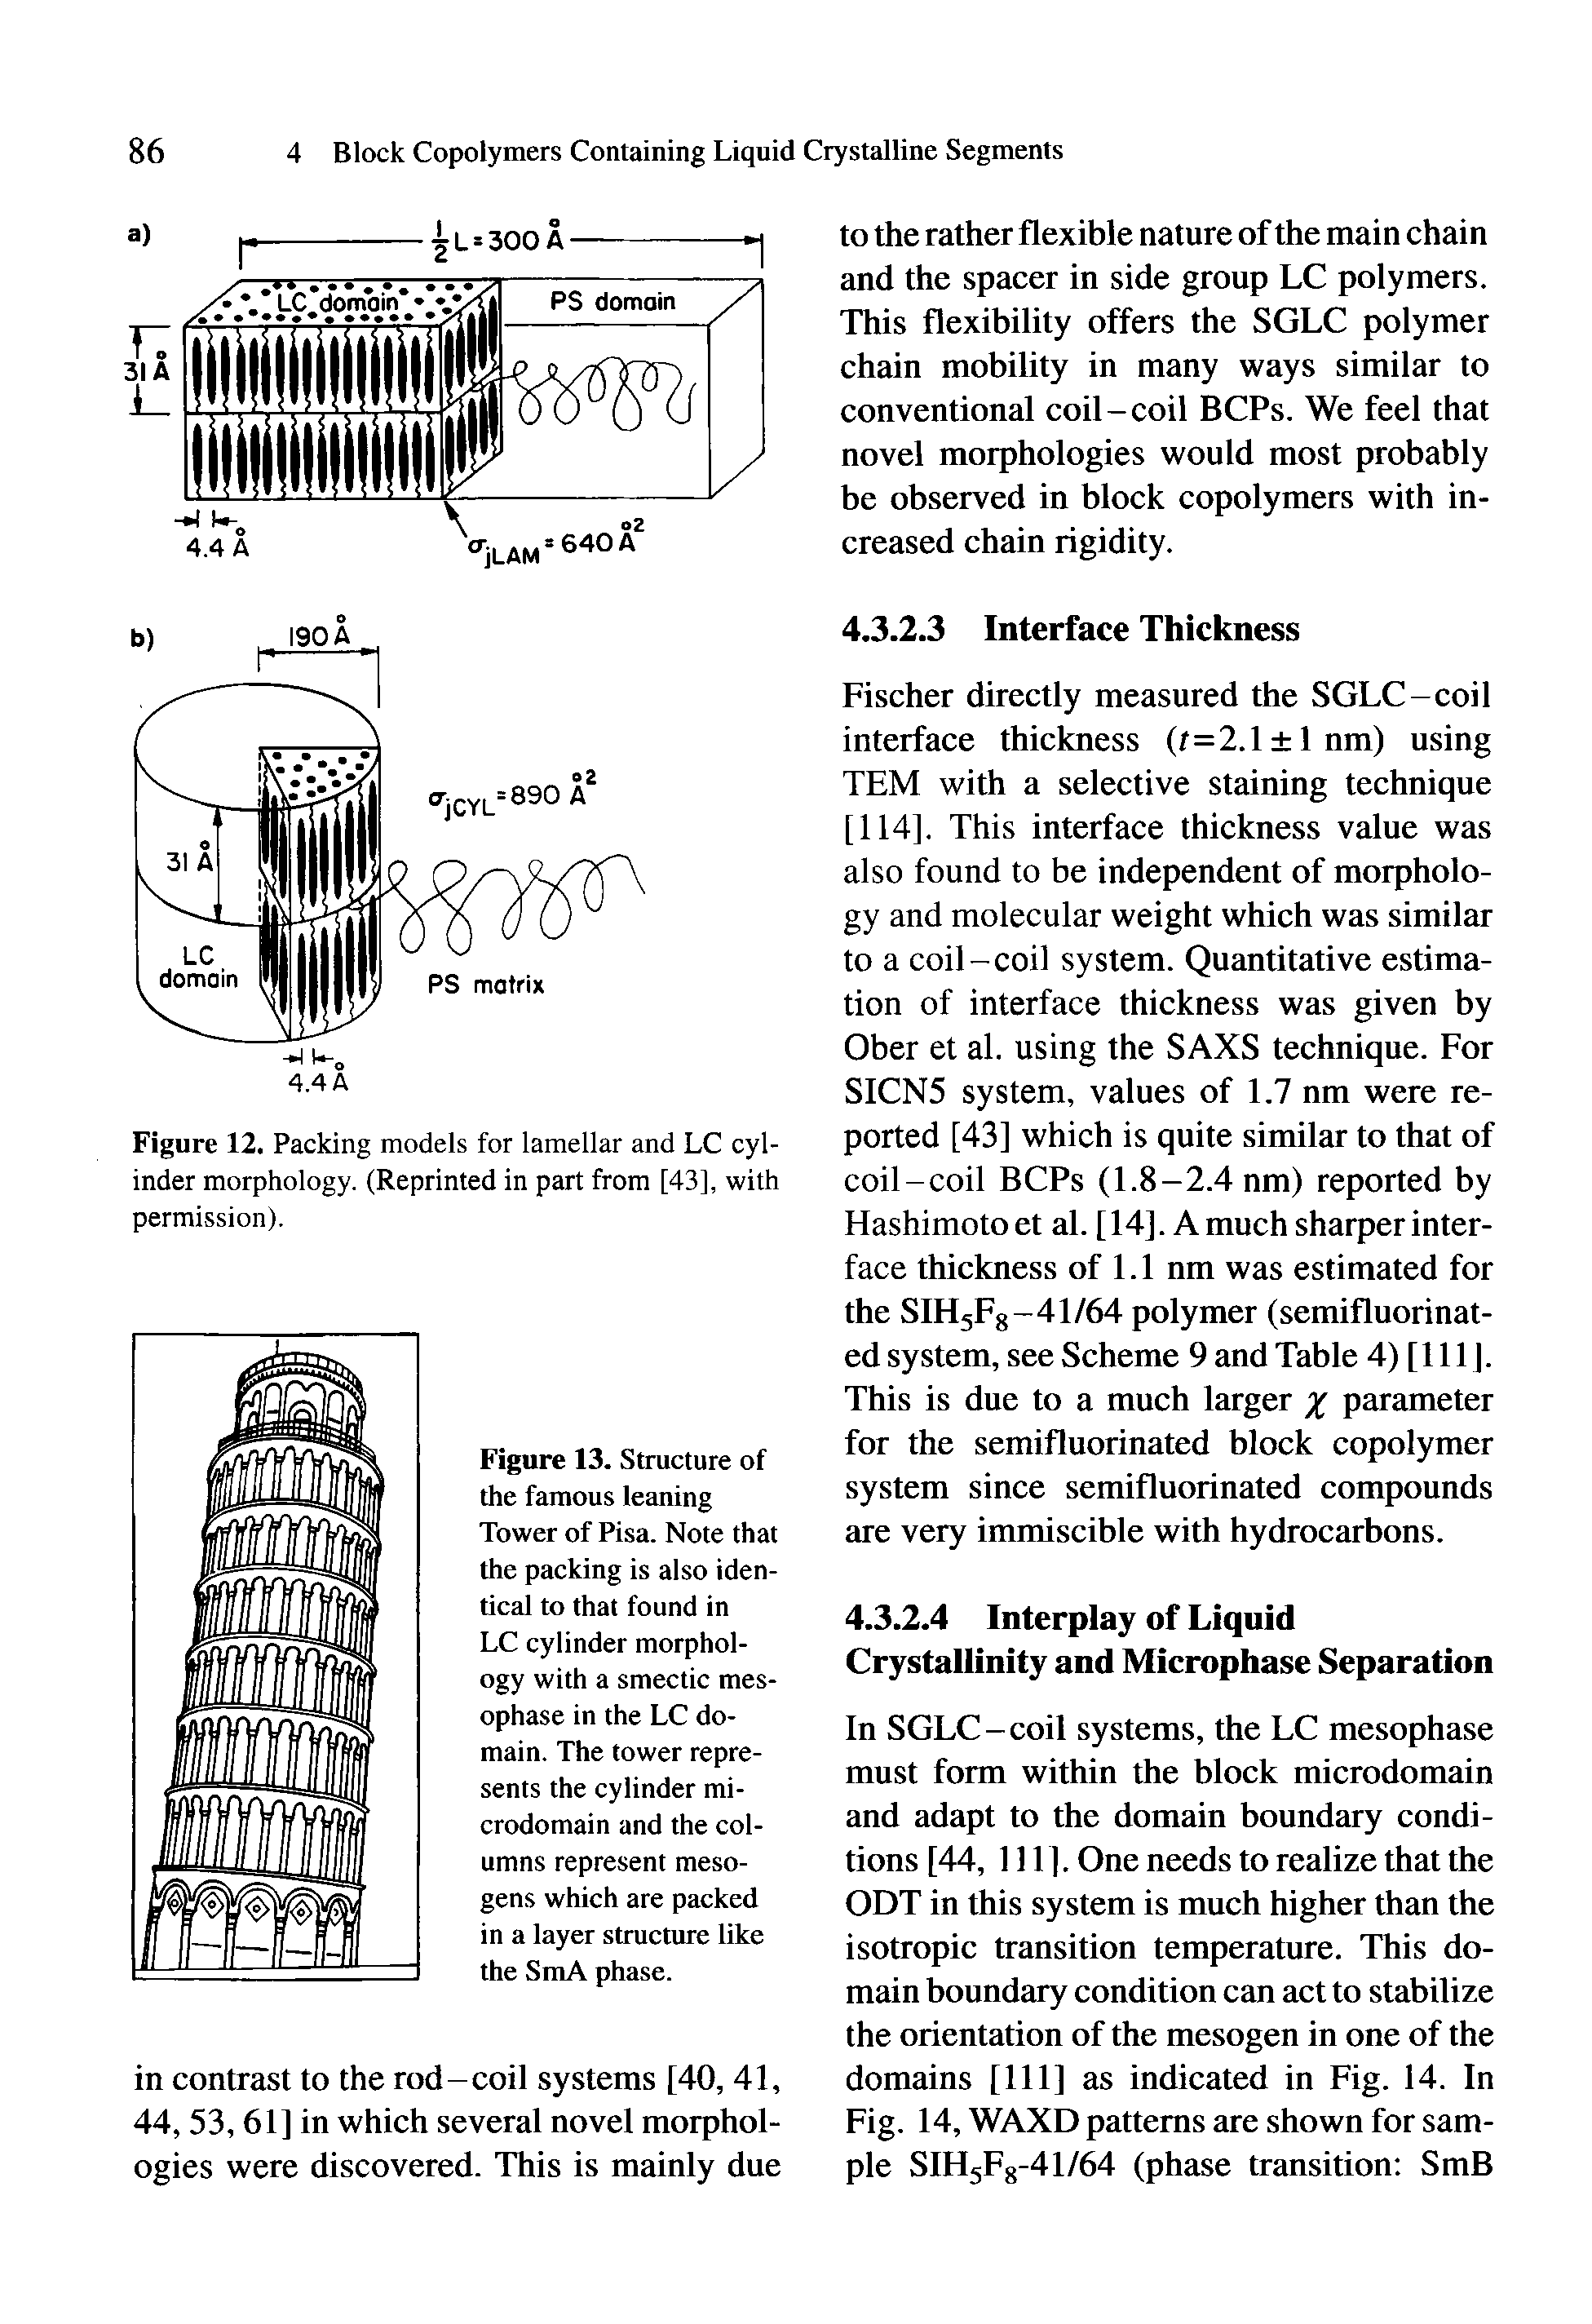 Figure 13. Structure of the famous leaning Tower of Pisa. Note that the packing is also identical to that found in LC cylinder morphology with a smectic mes-ophase in the LC domain. The tower represents the cylinder microdomain and the columns represent meso-gens which are packed in a layer structure like the SmA phase.